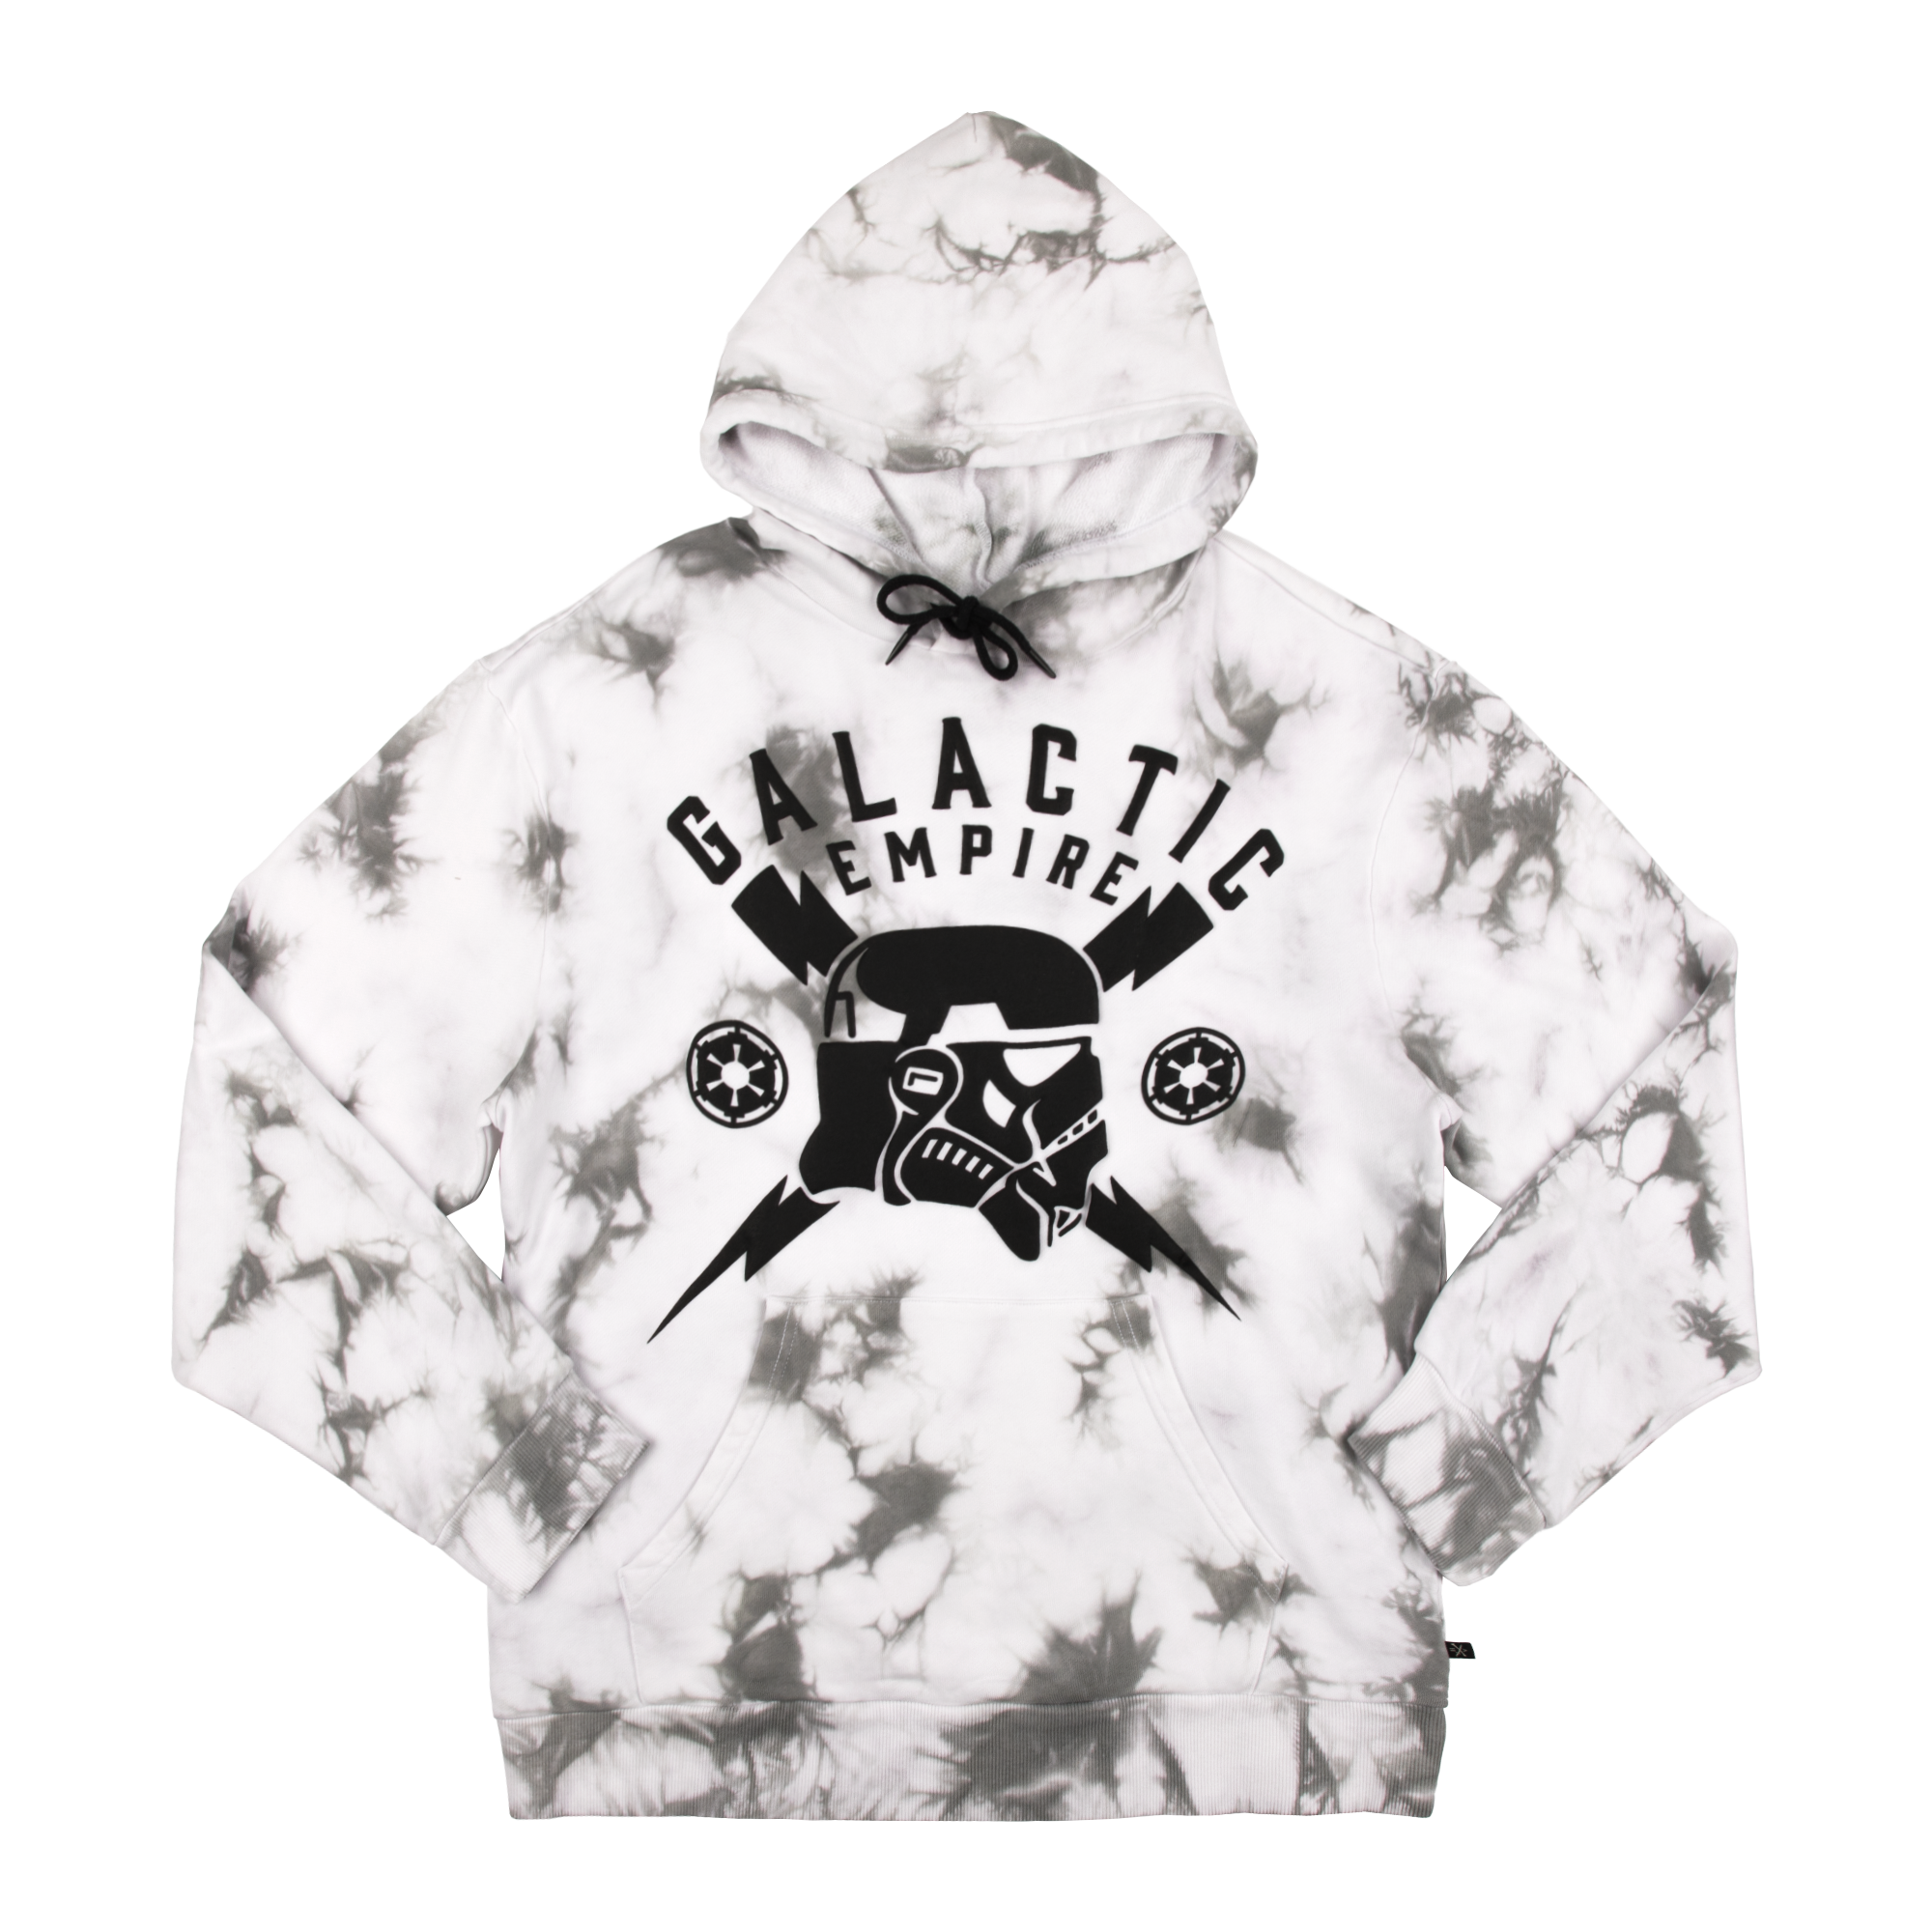 Stormtrooper Helmet With Crossed Bolts Cloud Wash Hoodie and Shorts Lounge Set